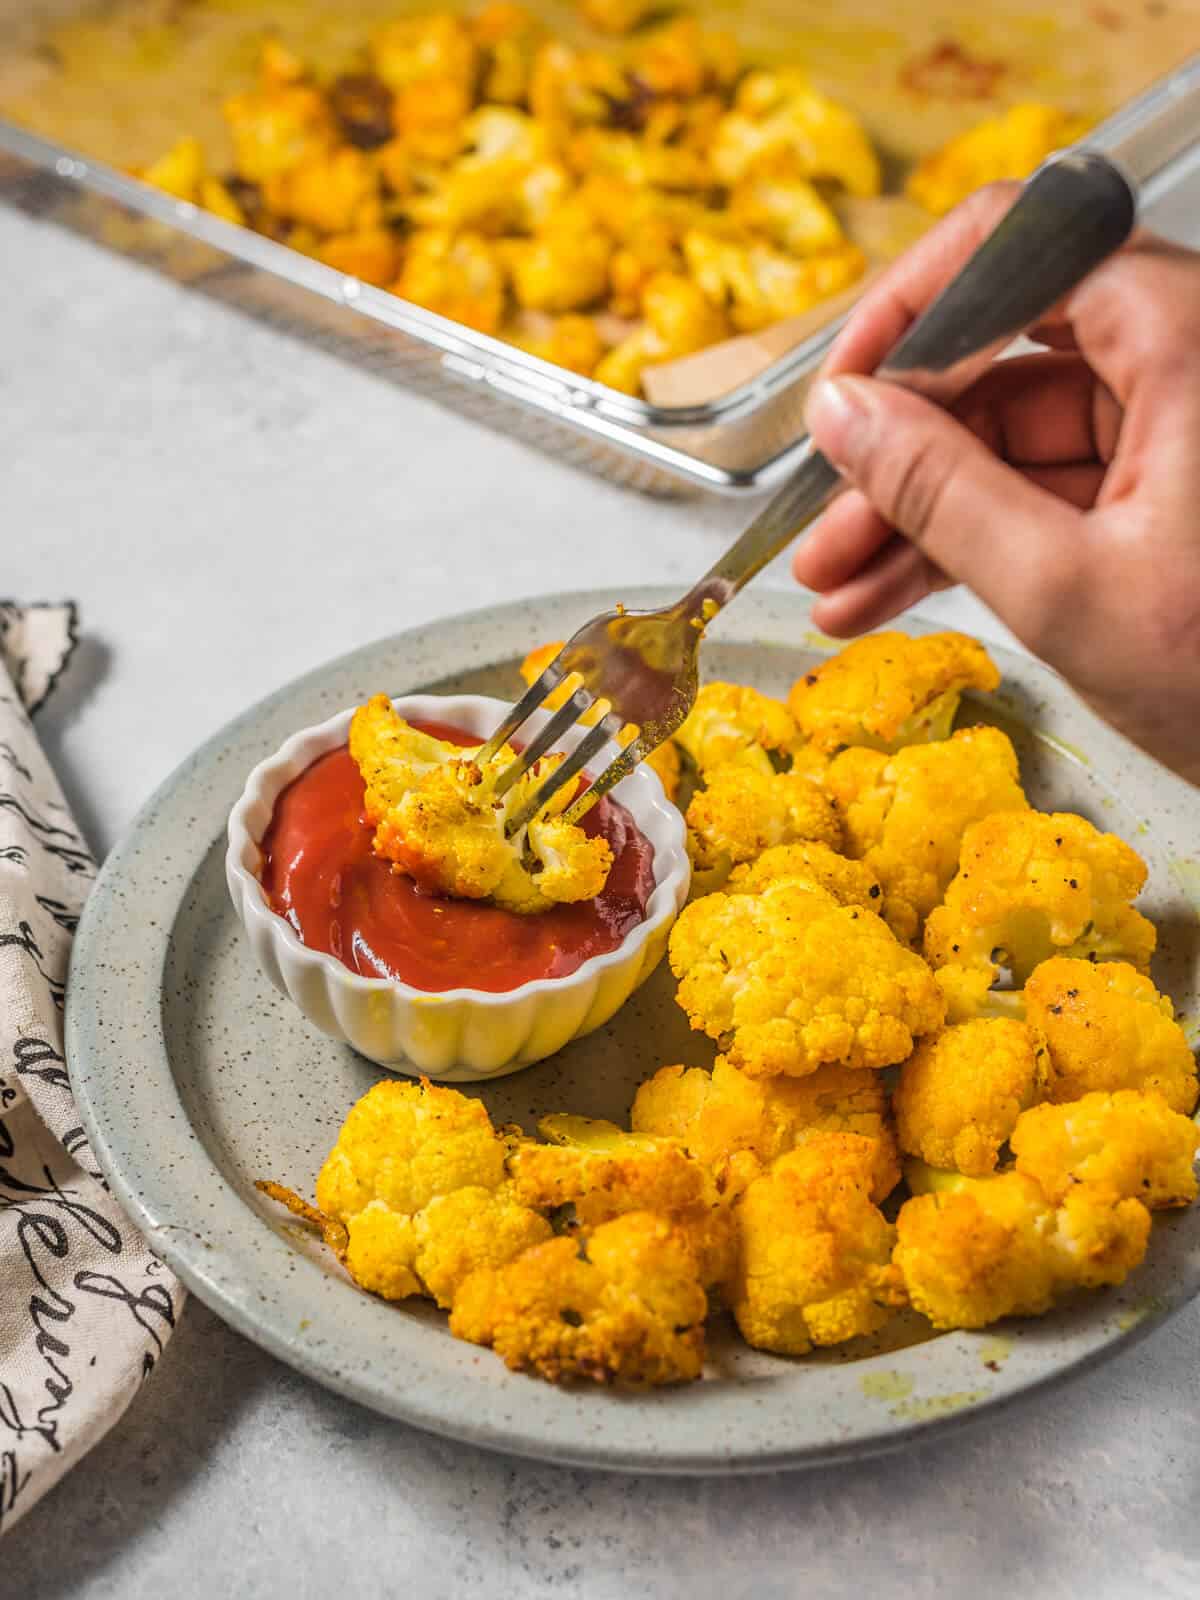 A fork grabbing a piece of cauliflower from a plate of roasted cauliflower, and dipping into a dish of ketchup.